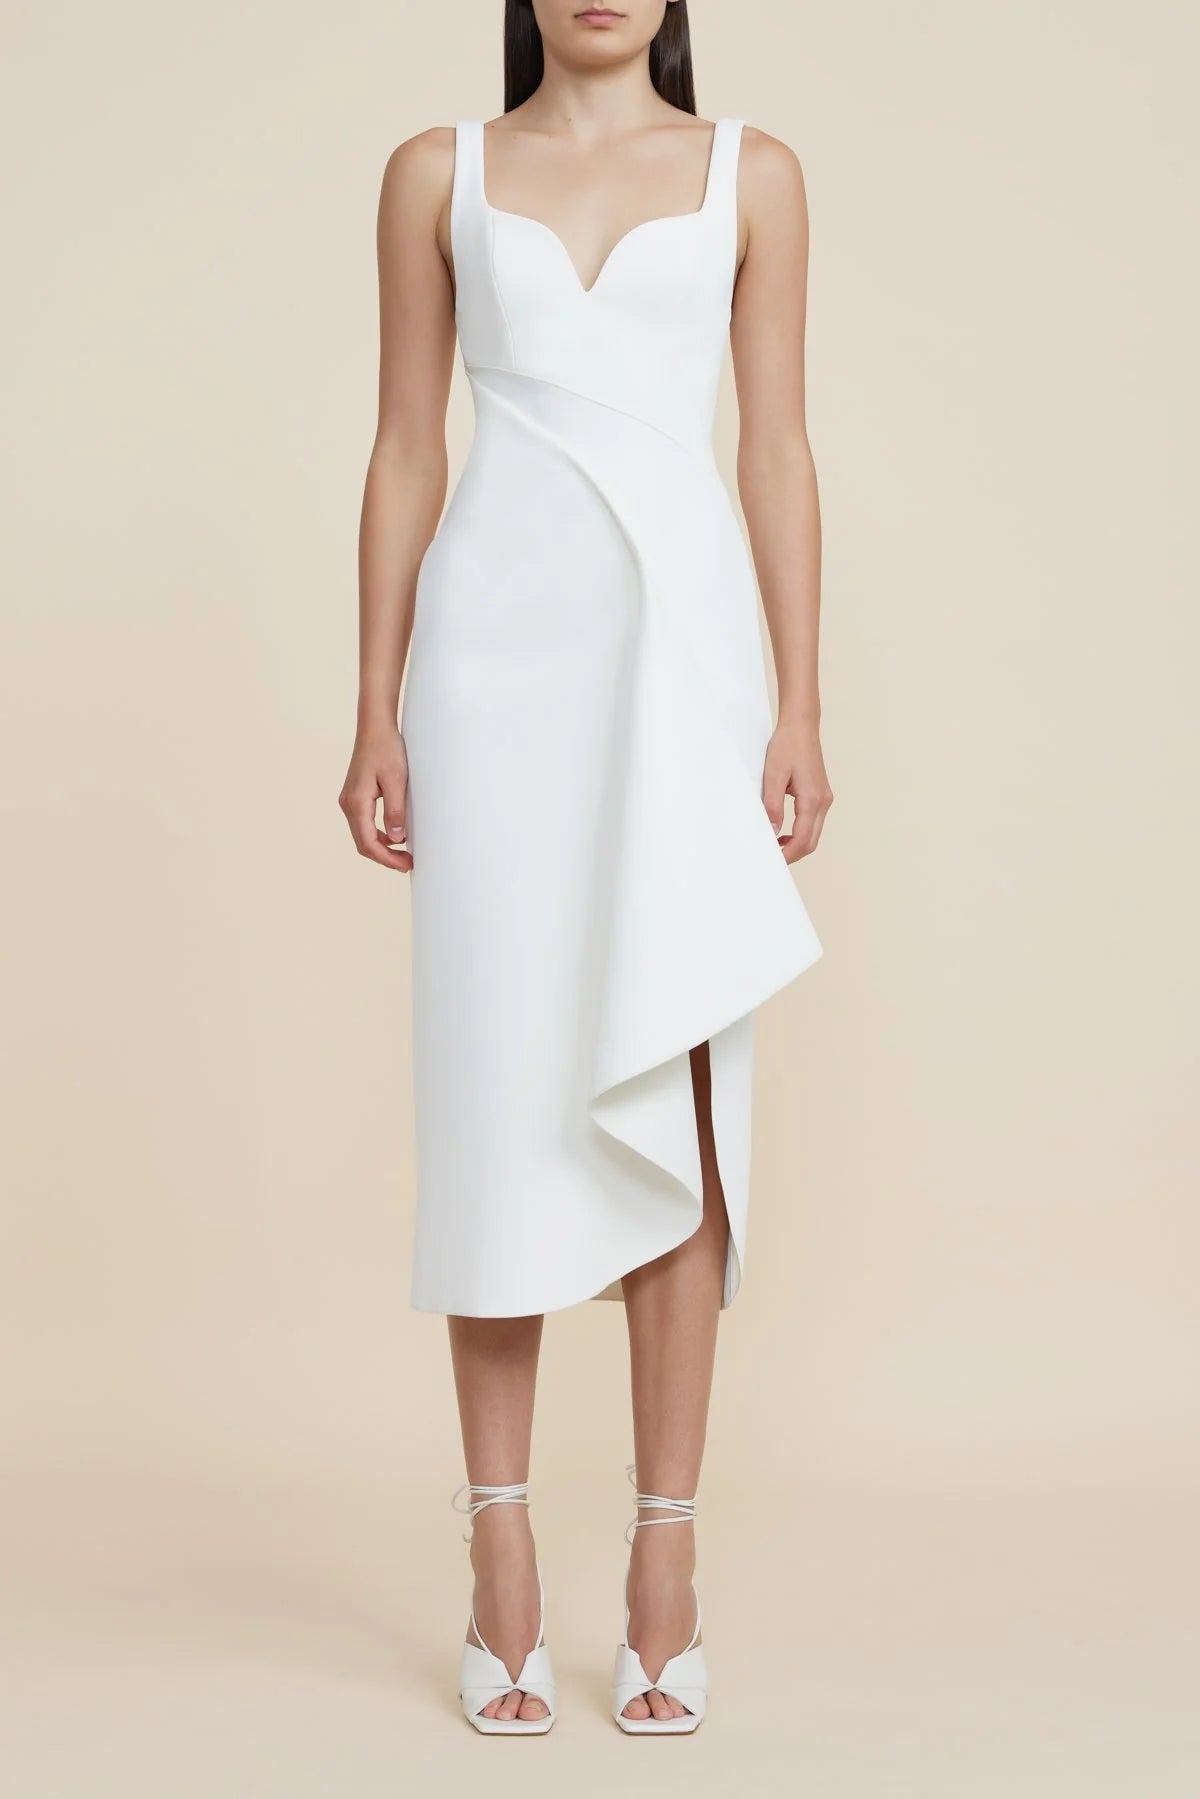 Acler Gowrie Midi Dress in Ivory - Estilo Boutique